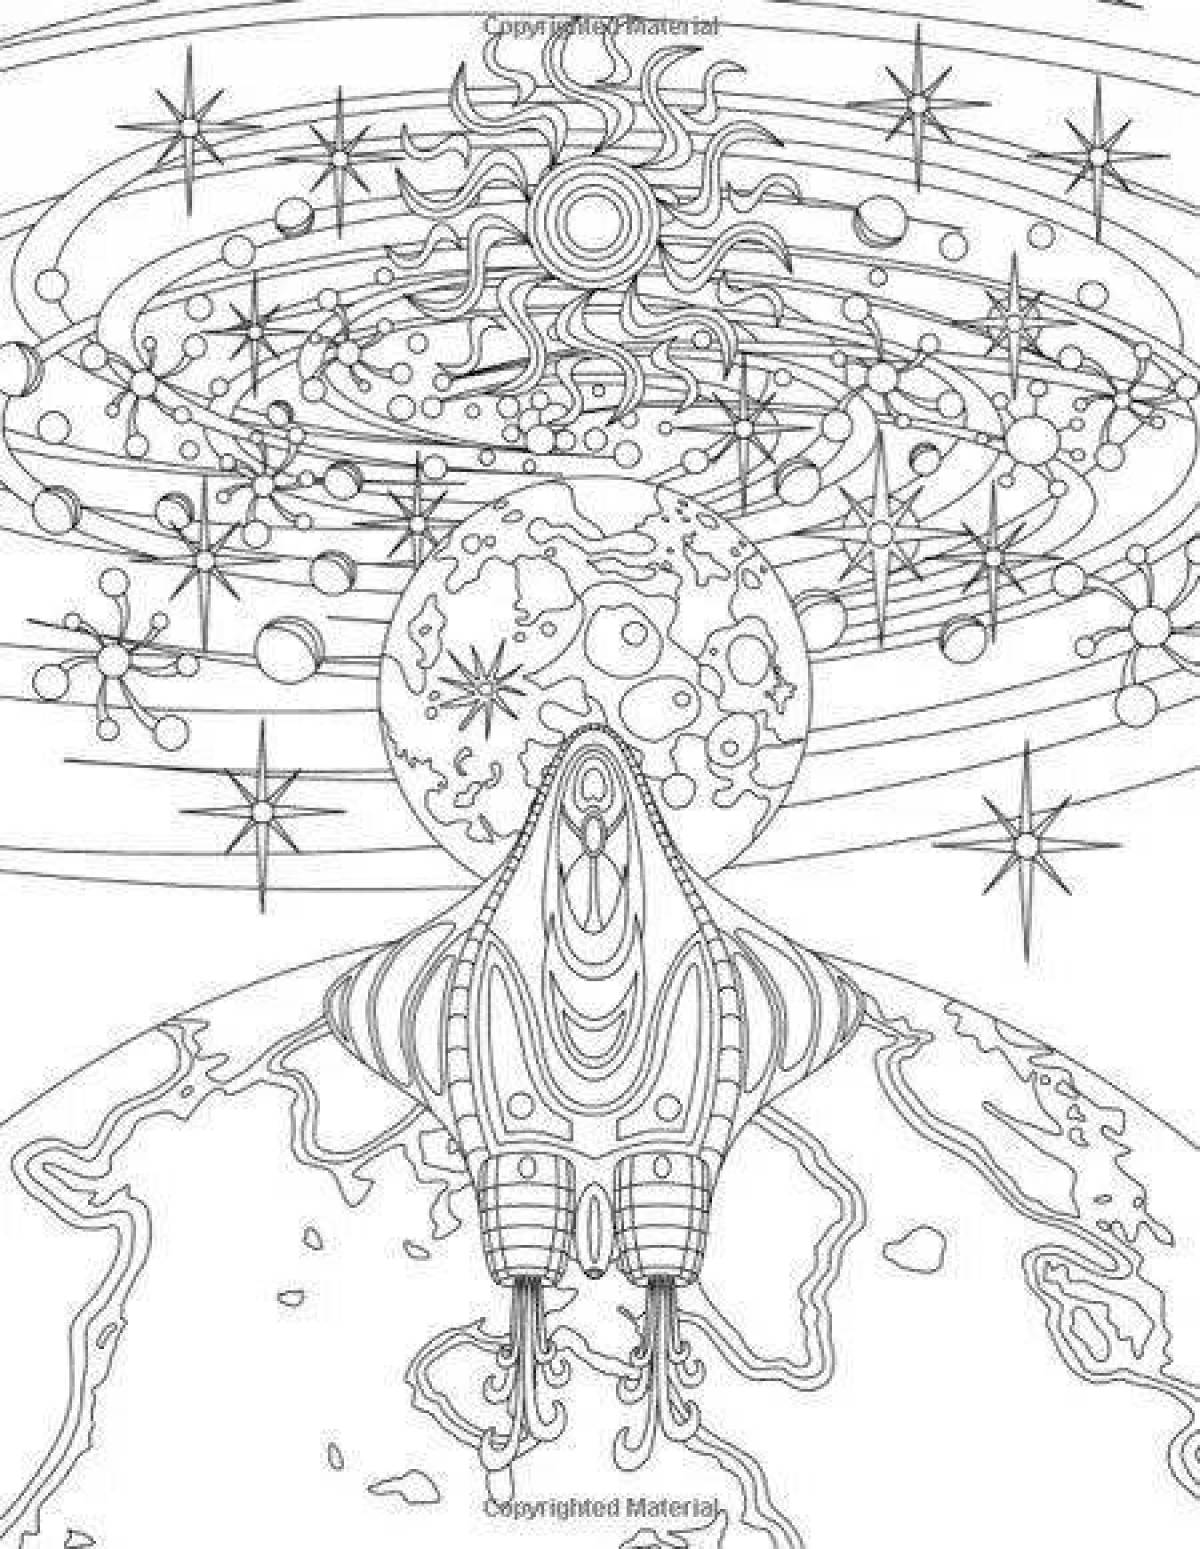 Glowing coloring book antistress space